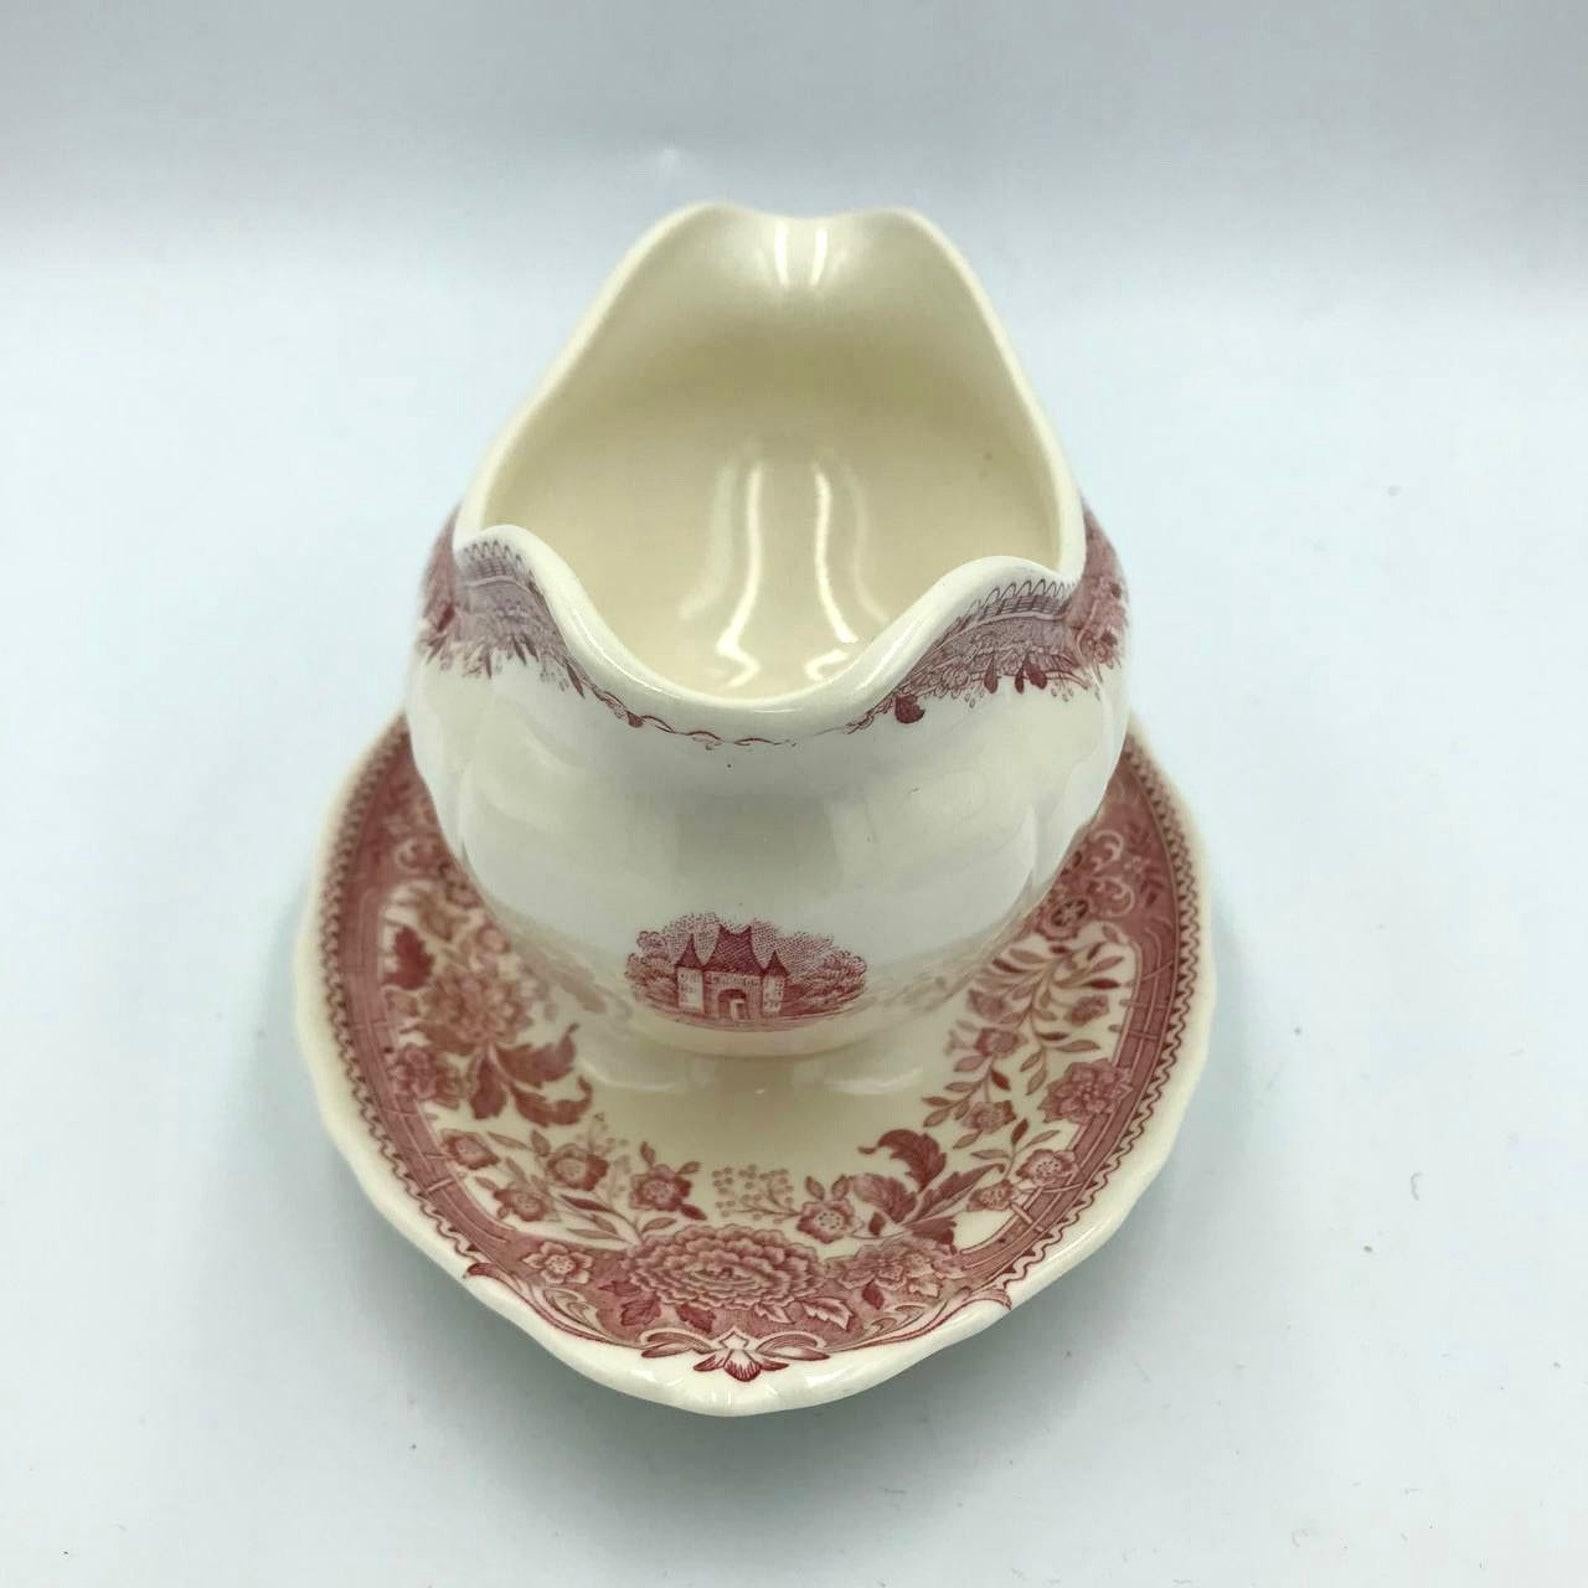 Sauce Bowl with Fixed Bottom Dish.
 Made by Villeroy & Boch decorated with the ‘Burgenland’ pattern in red.

This Red Burgenland Sauce Bowl is out off production. 

Burgenland is one of Villeroy & Boch’s most iconic patterns.

It was produced from